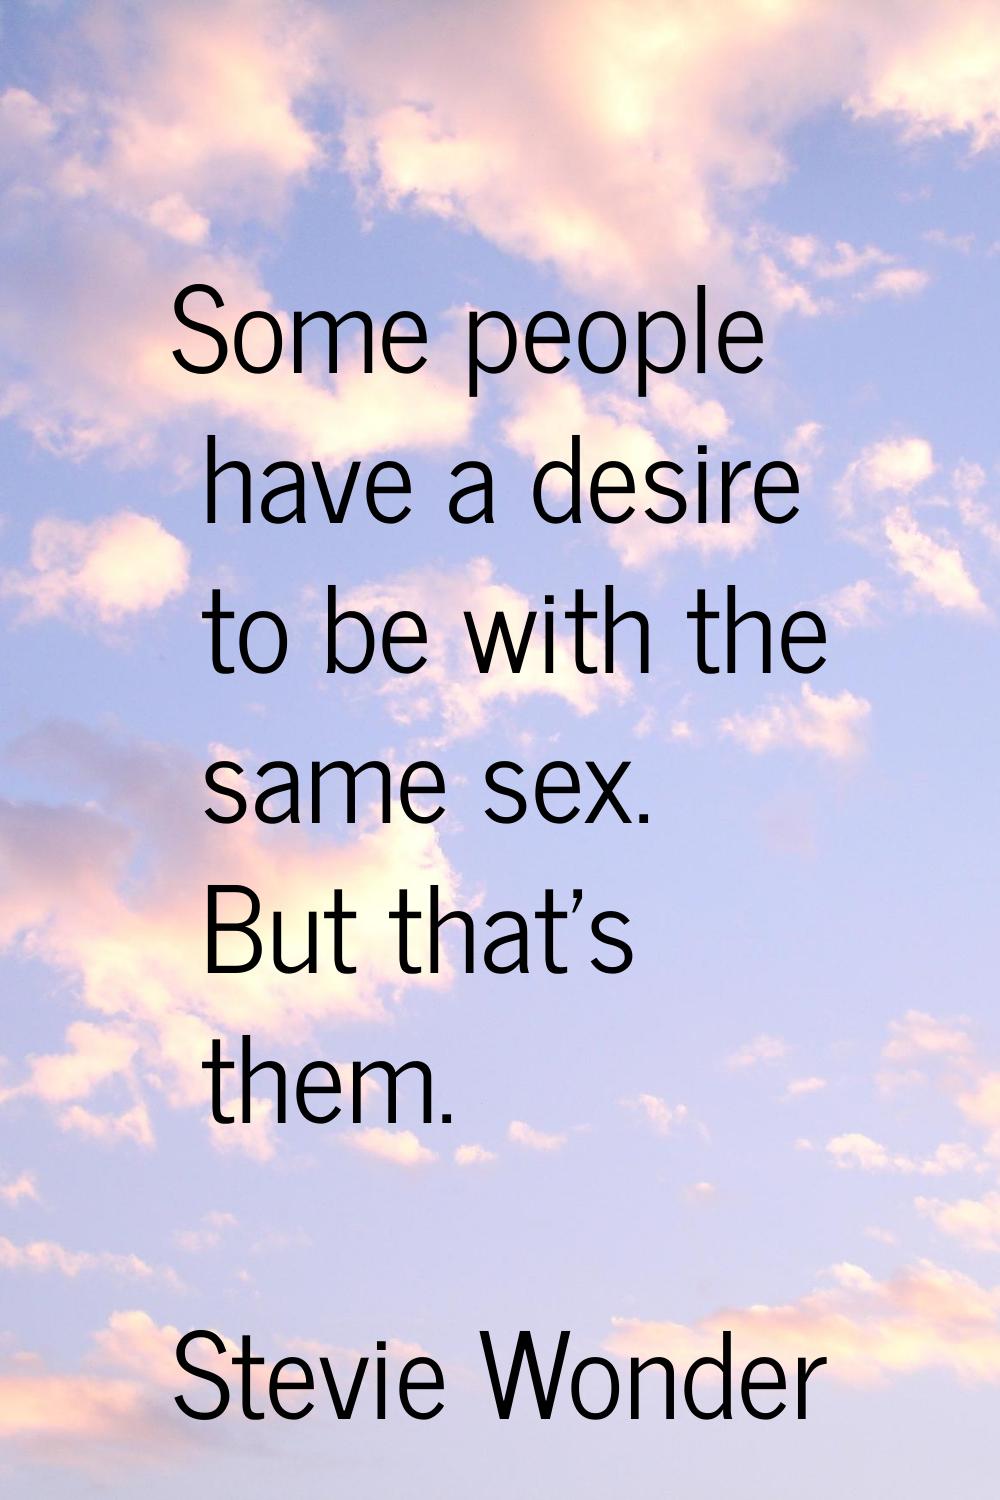 Some people have a desire to be with the same sex. But that's them.